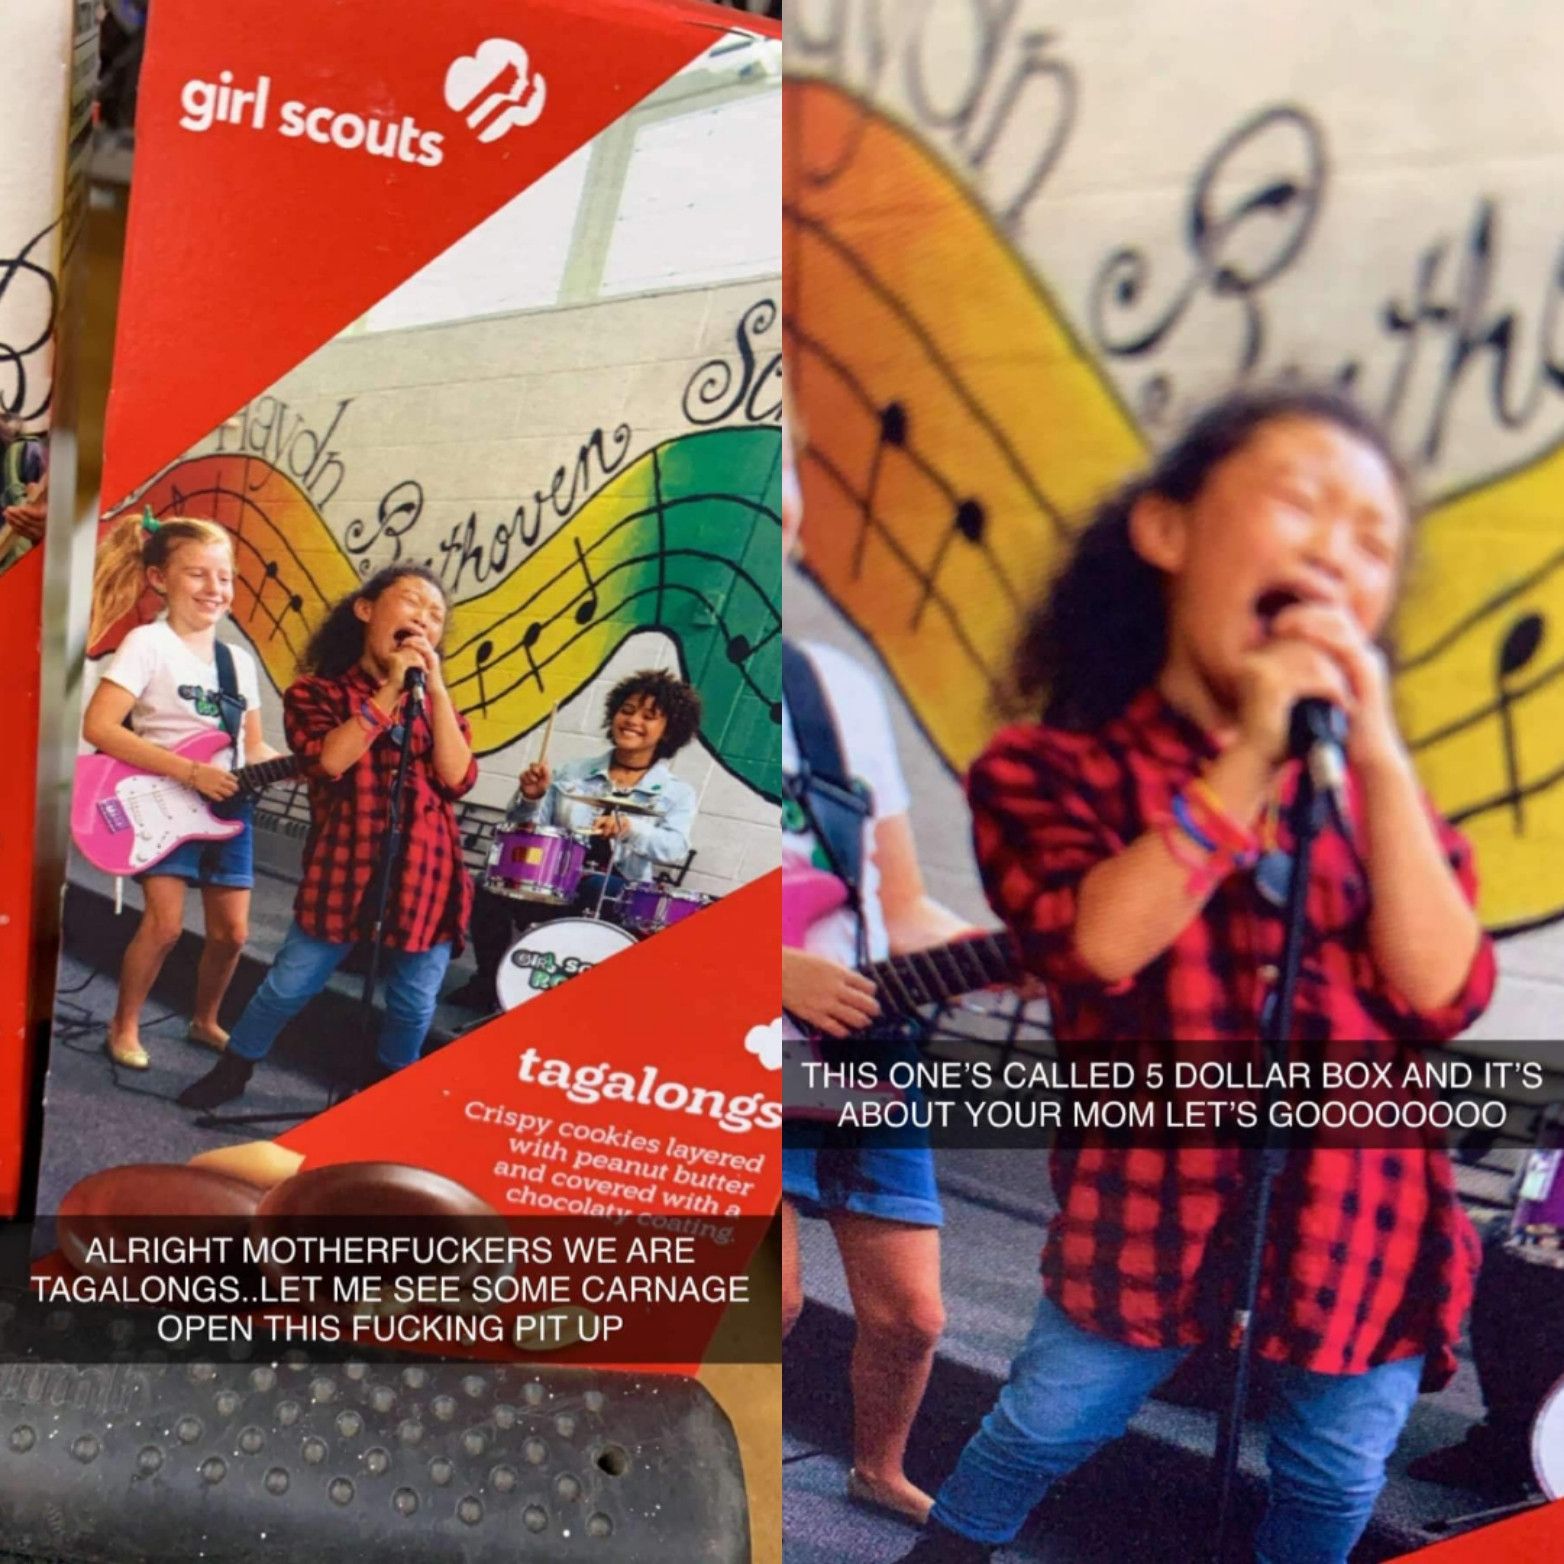 Girl Scouts are metal AF